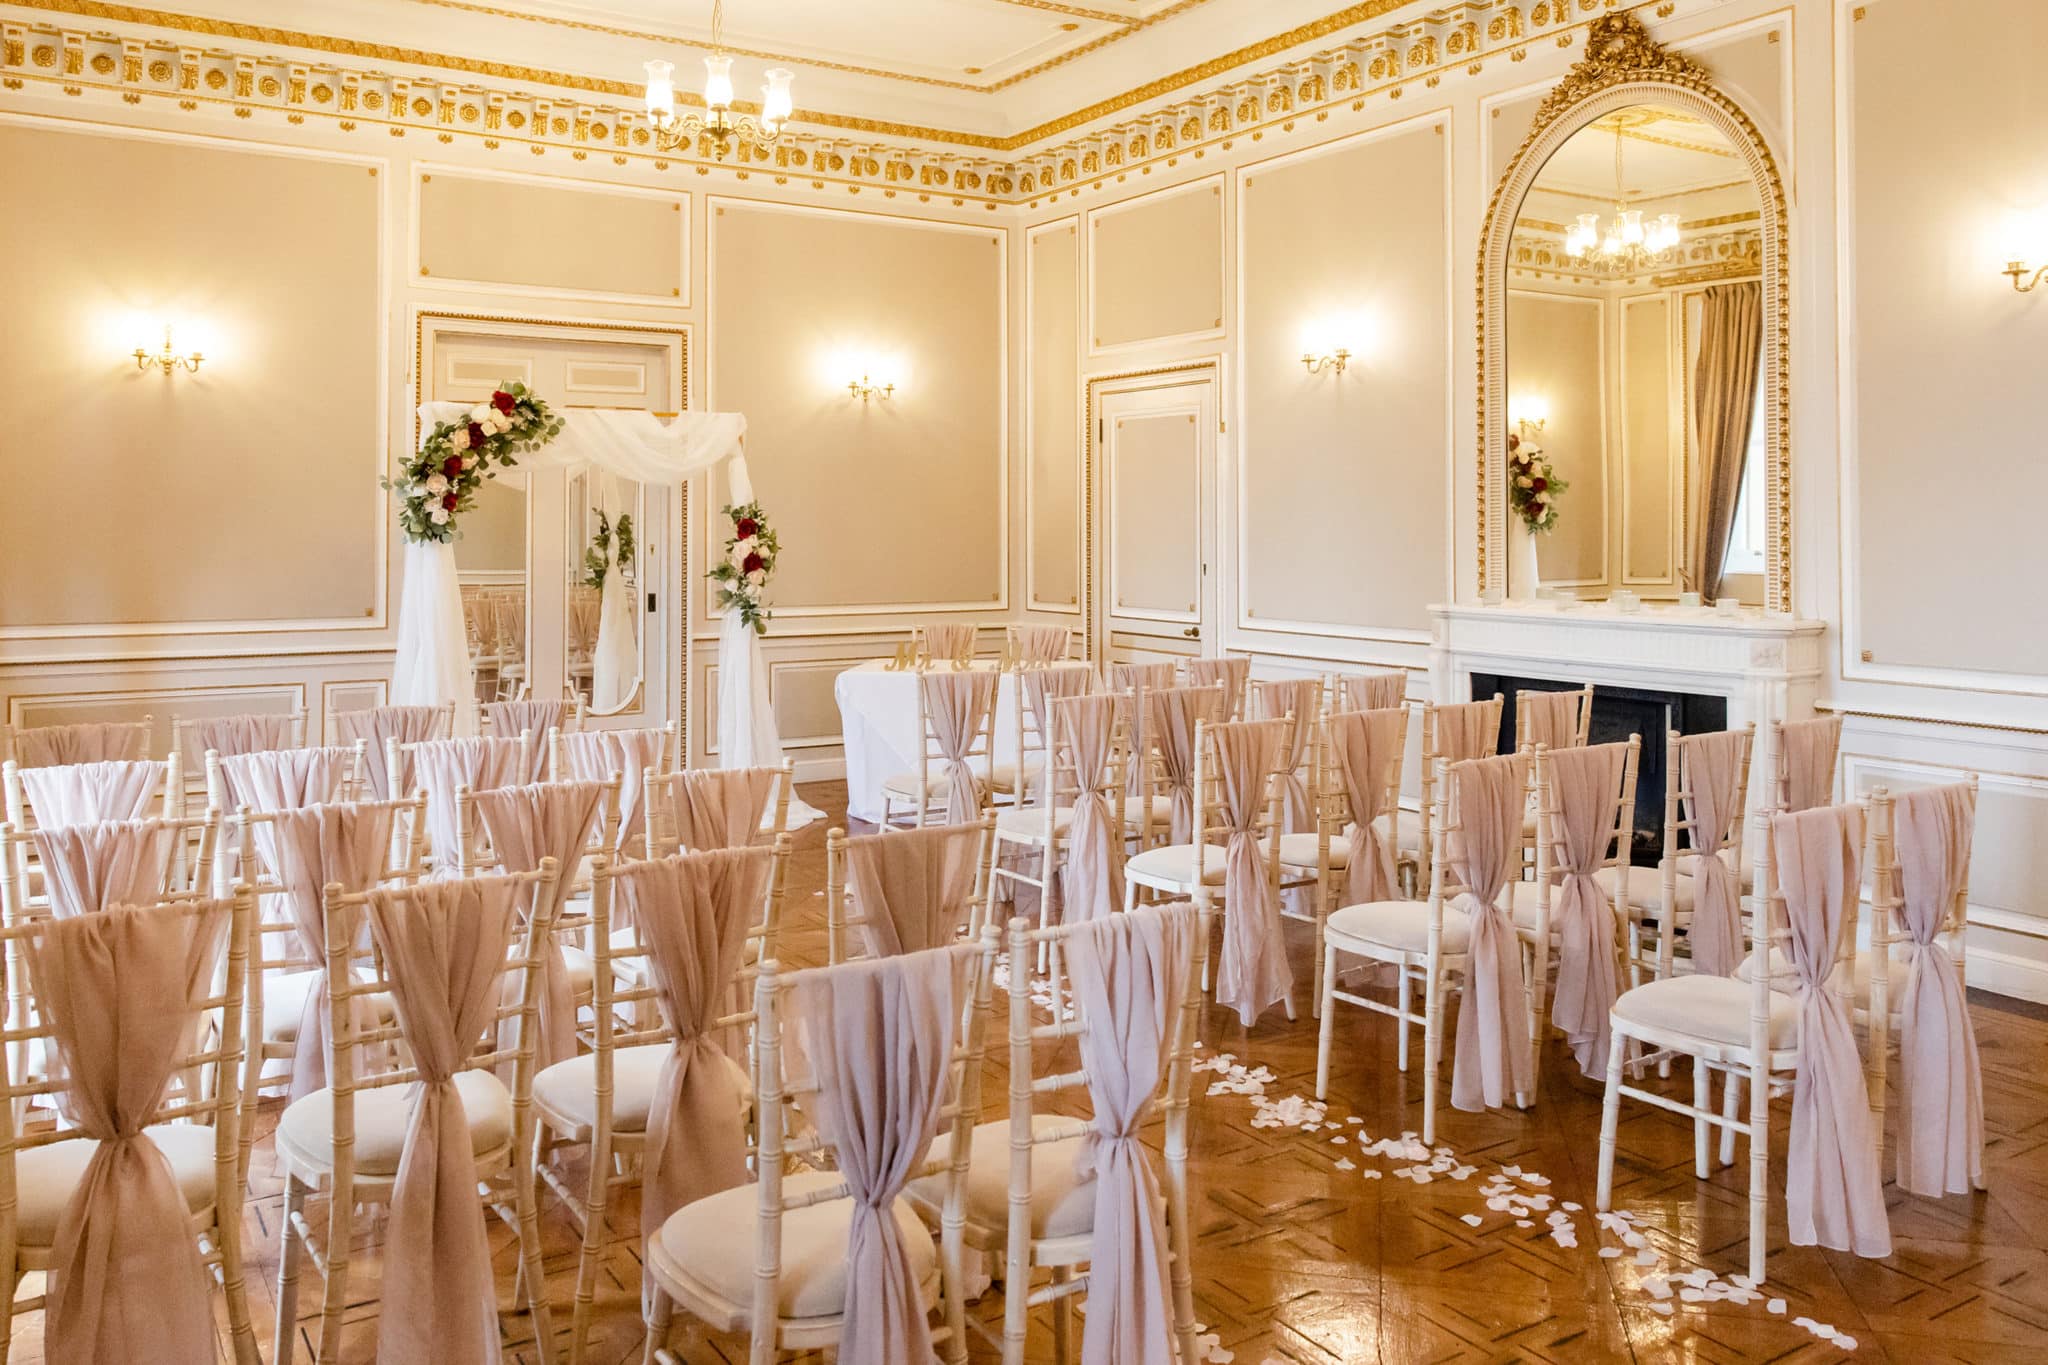 The gold room at Salomons ready to receive wedding guests